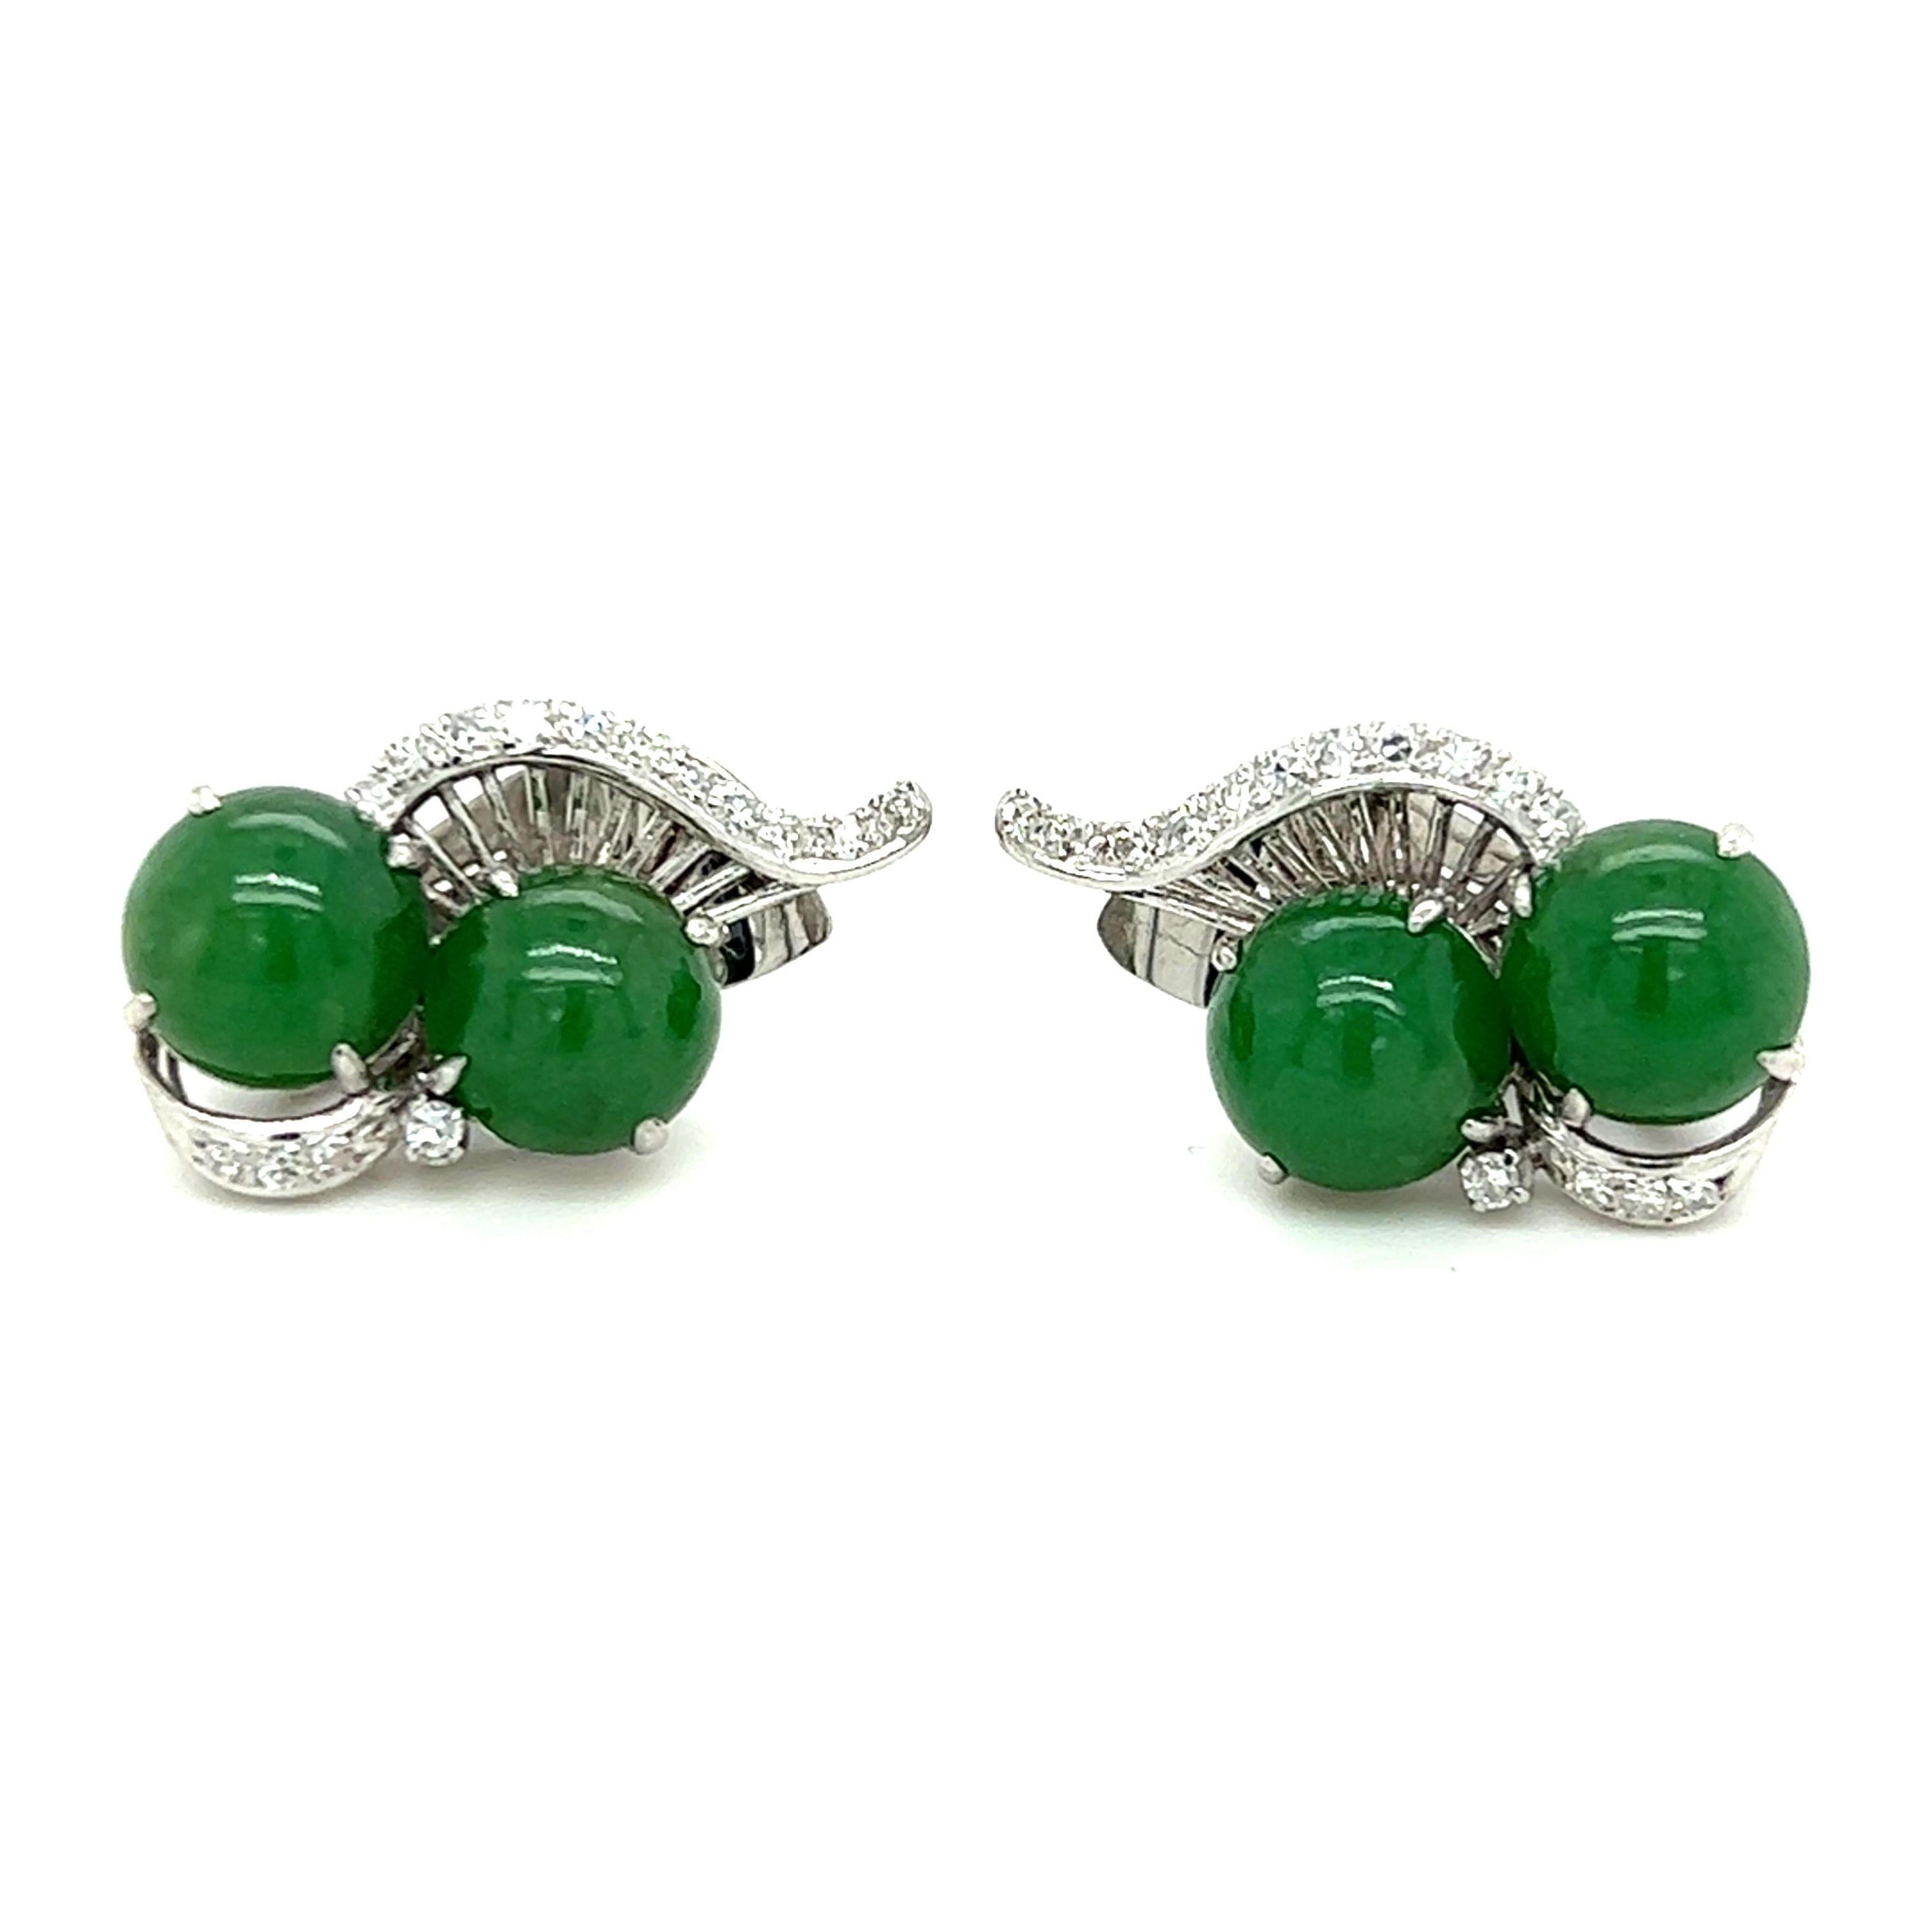 Chic and timeless, these 1950s jadeite and diamond platinum ear clips feature deep, saturated green jadeite set inside a winding spray of diamonds. These earrings offer color, sparkle, and glamour without being over-the-top, allowing them to be